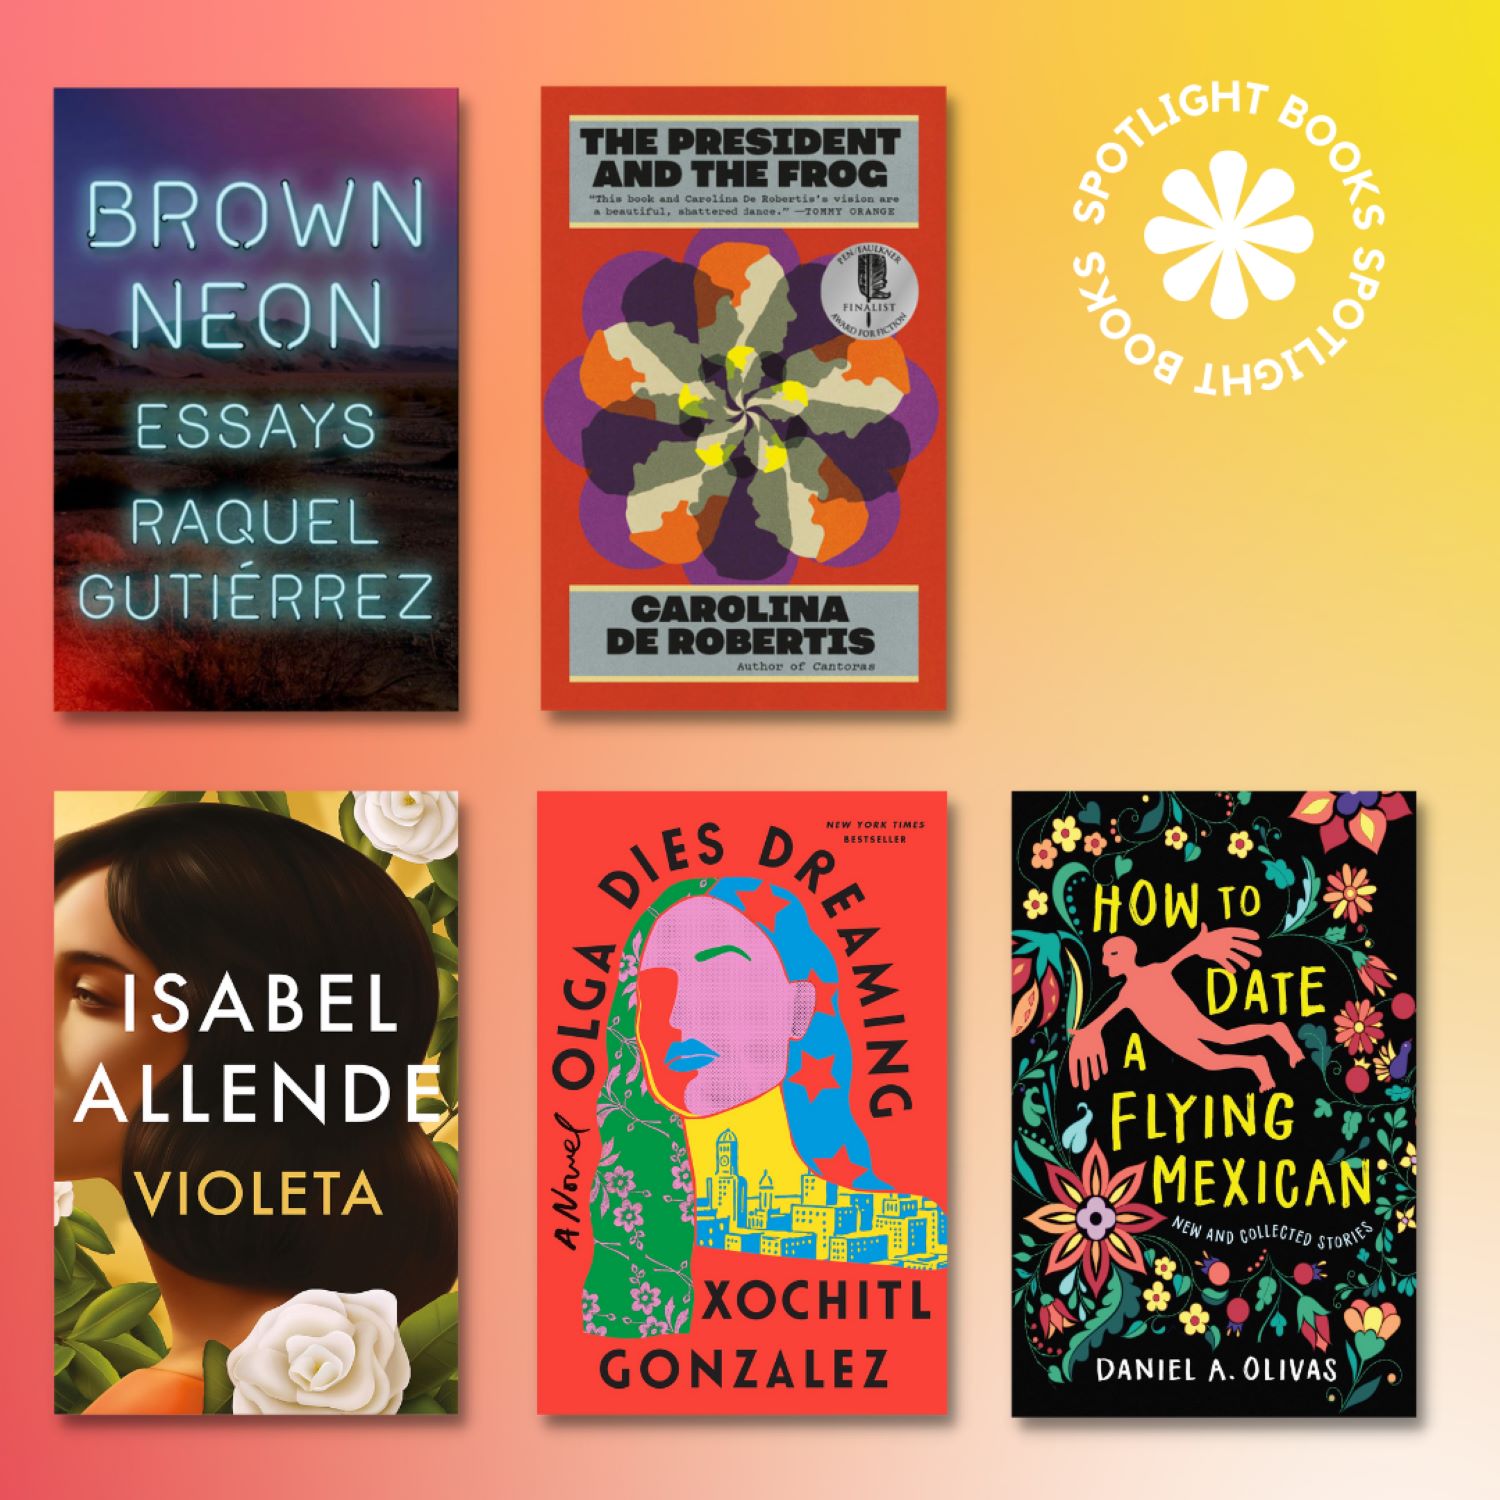 Keep the celebration of Latinx and Hispanic Heritage month going with these (& so many more) incredible reads available in print and eBook from the Howe Library! Link in bio for more! #uvm #uvmlibraries #uvmreads #tbr #howememoriallibrary #hispanicheritagemonth #latinxheritagemonth